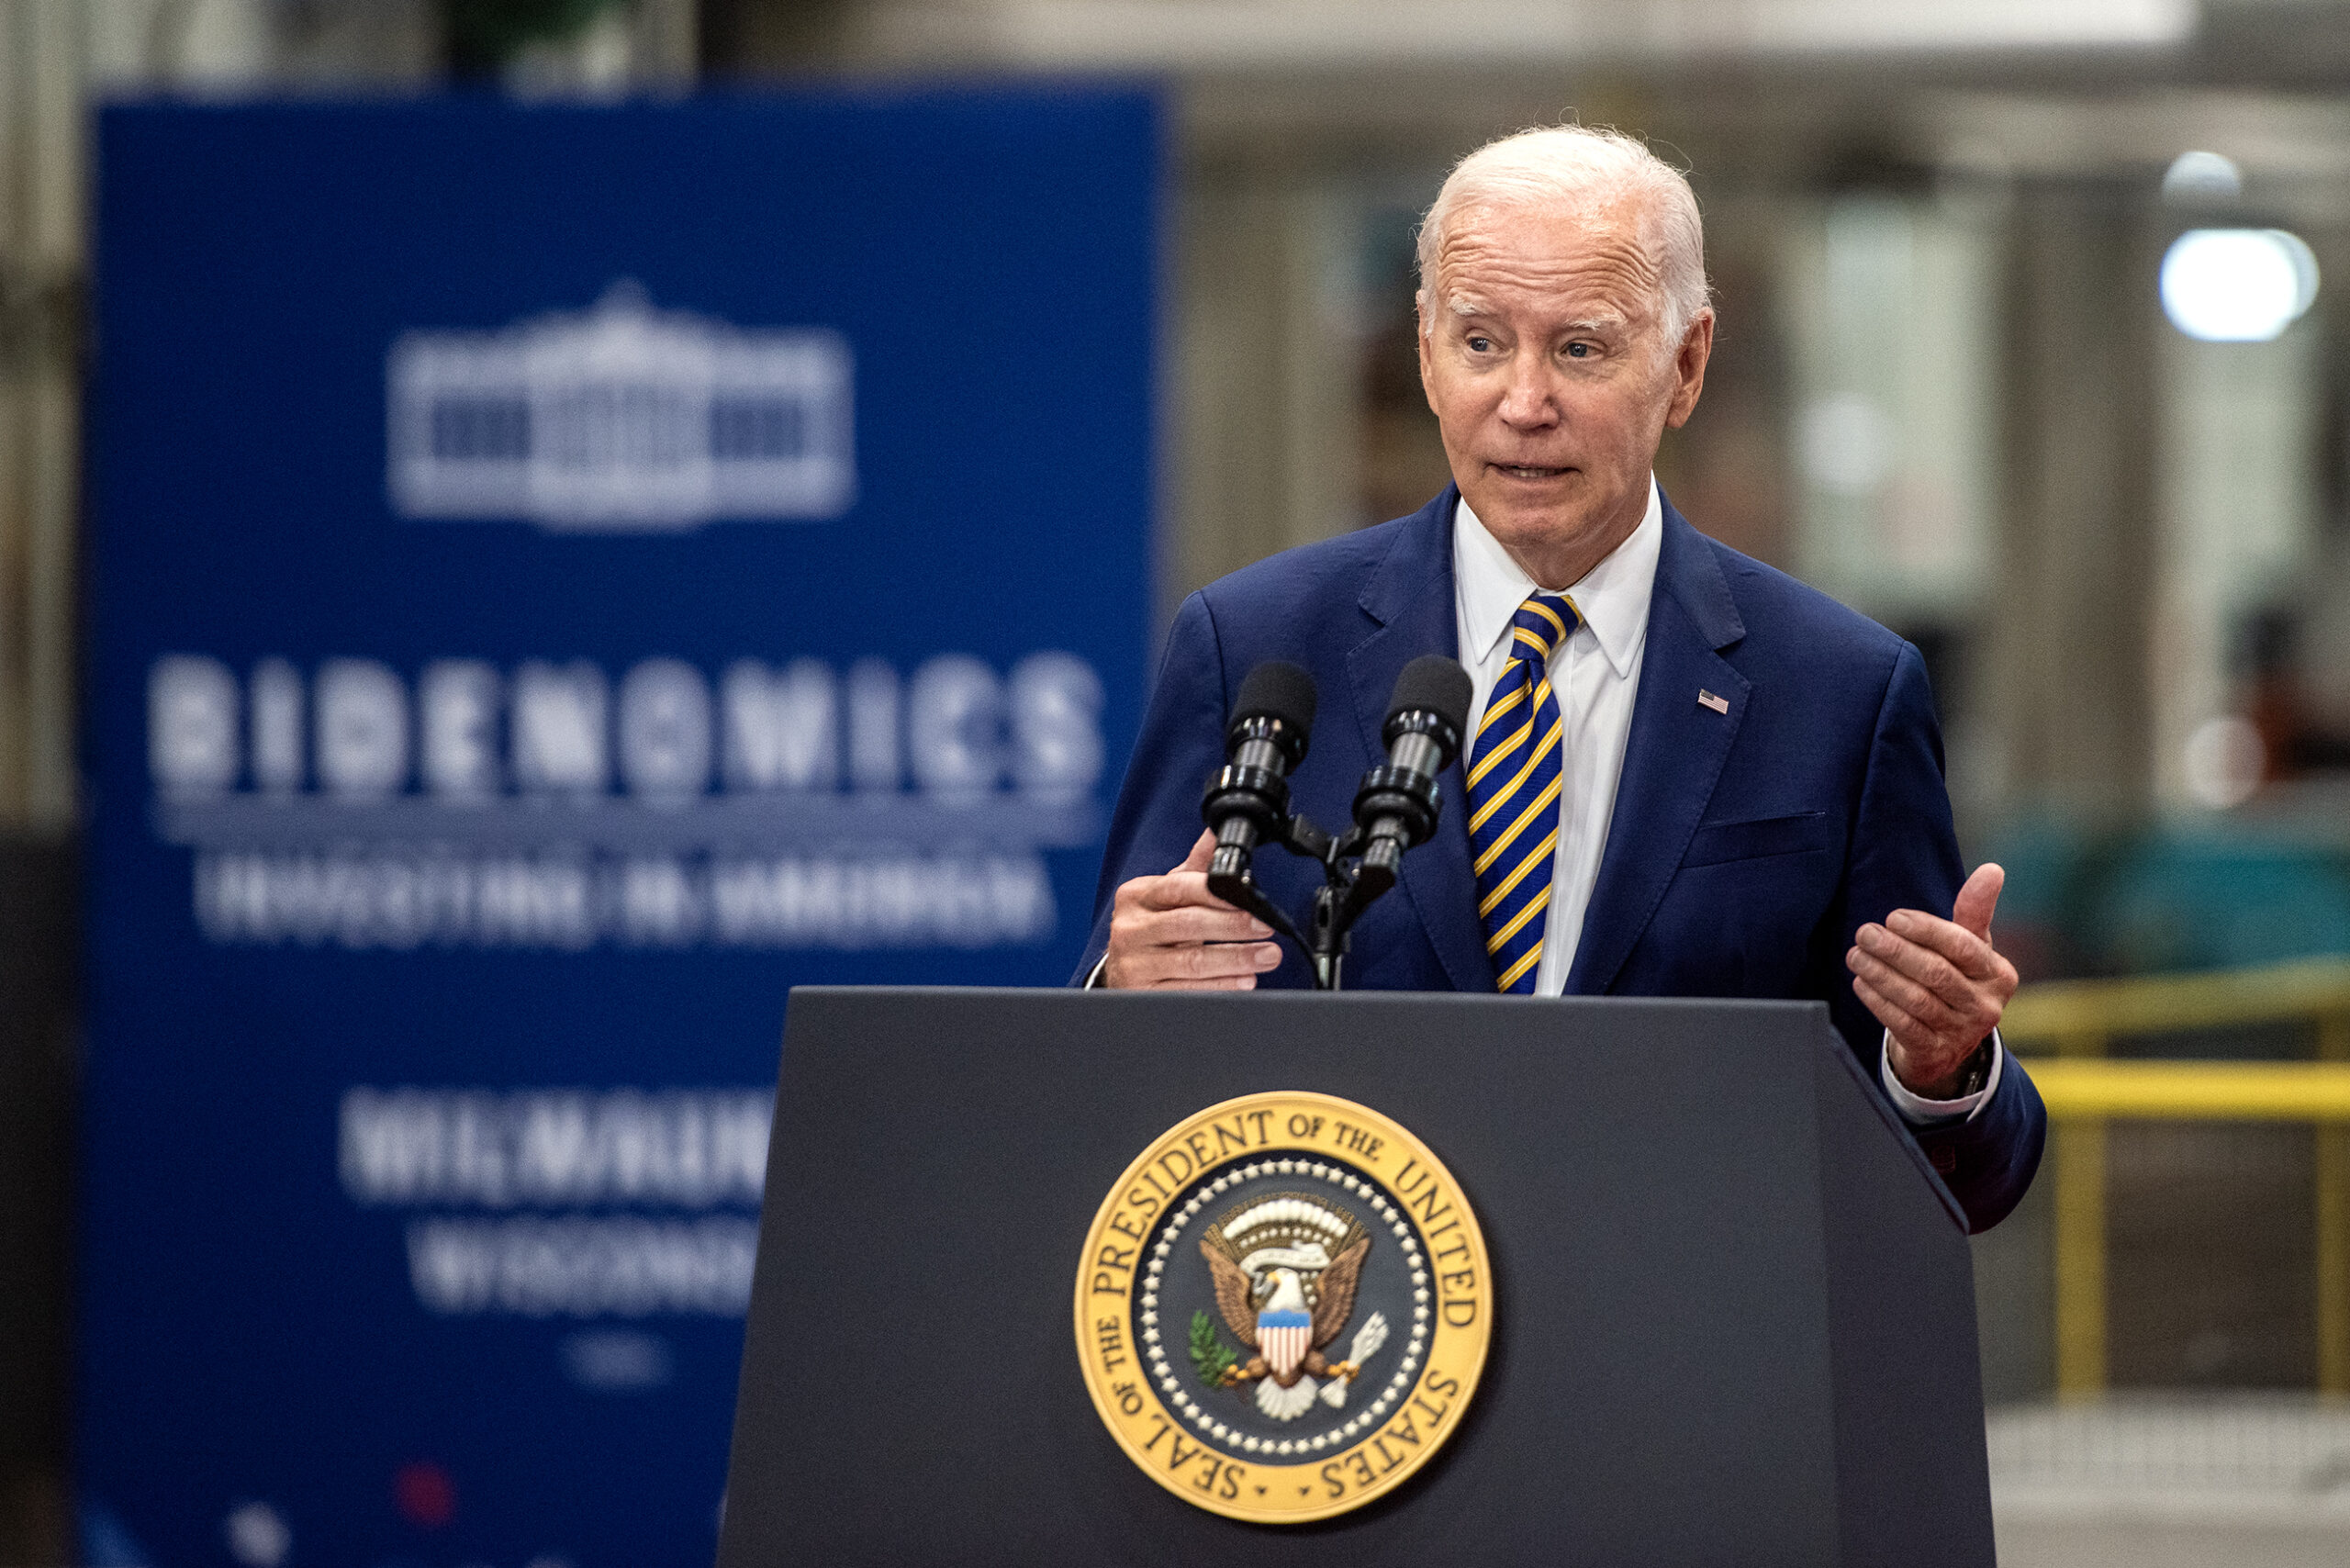 President Joe Biden will announce new investments for Black-owned businesses during Milwaukee visit